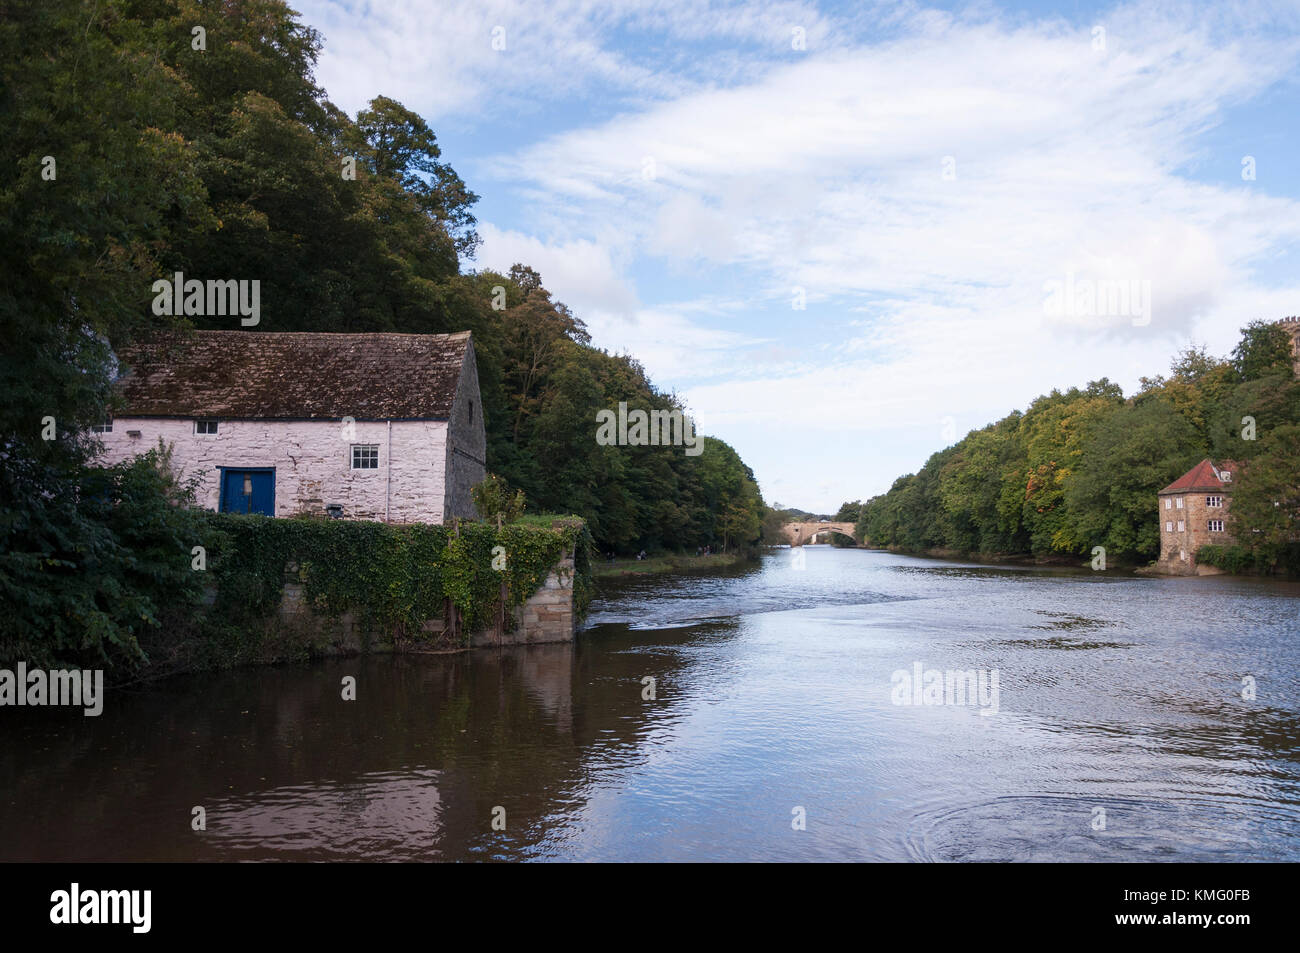 White stone Mill House sitting next to the river Wear with the old Fulling Mill further downbridg, in the City of Durham in the North East Of England. Stock Photo